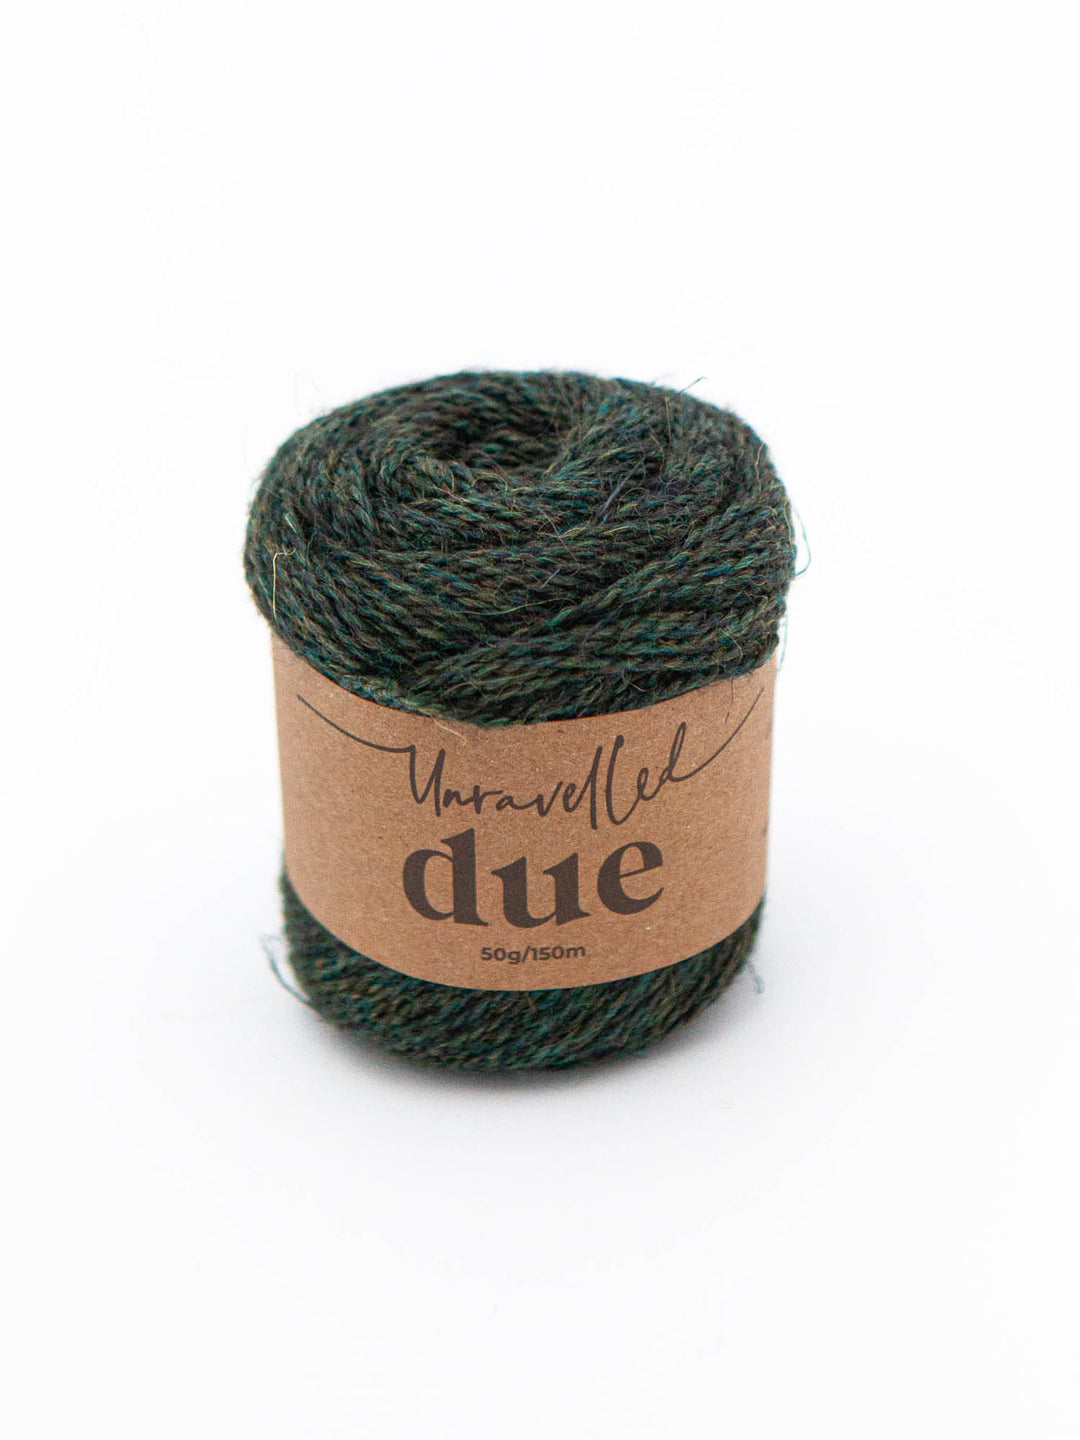 Unravelled Due